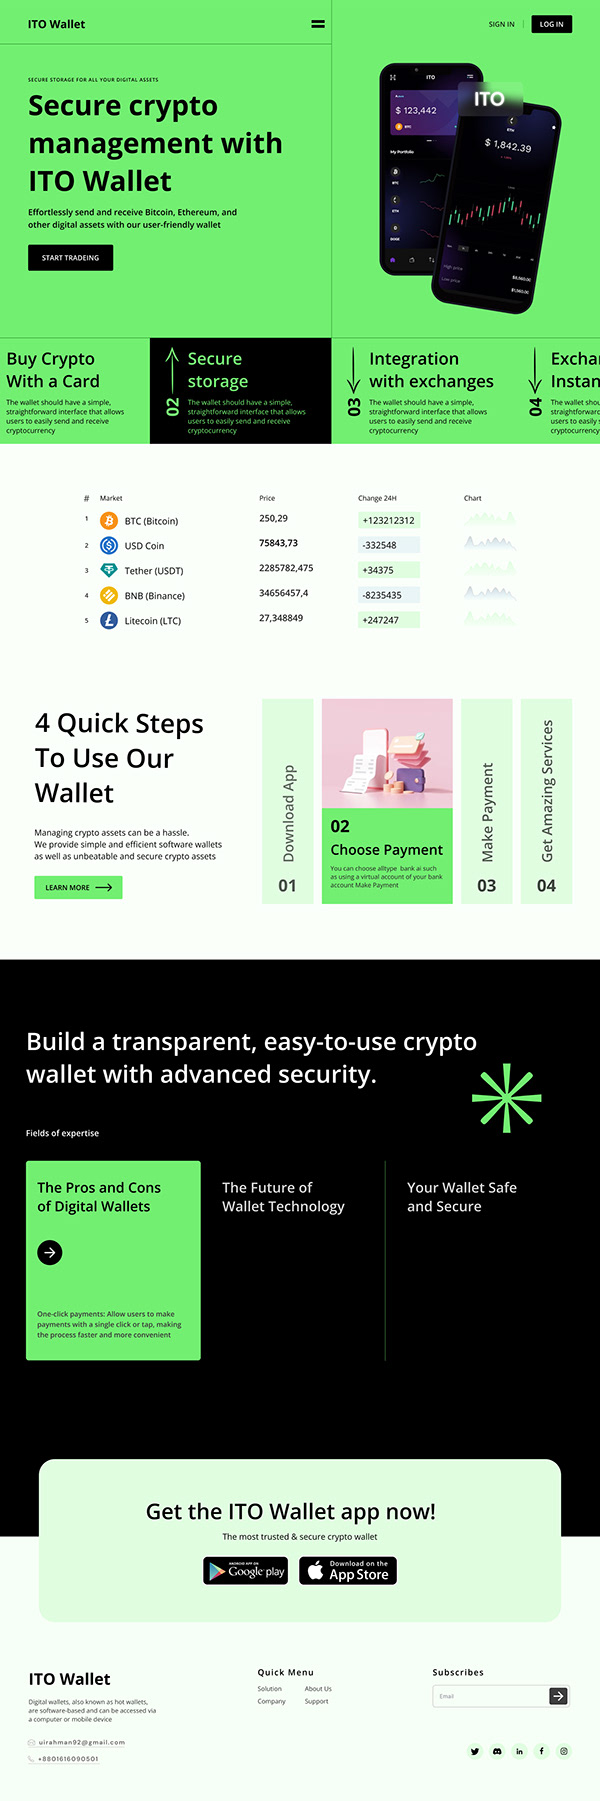 Crypto Wallet Landing Page